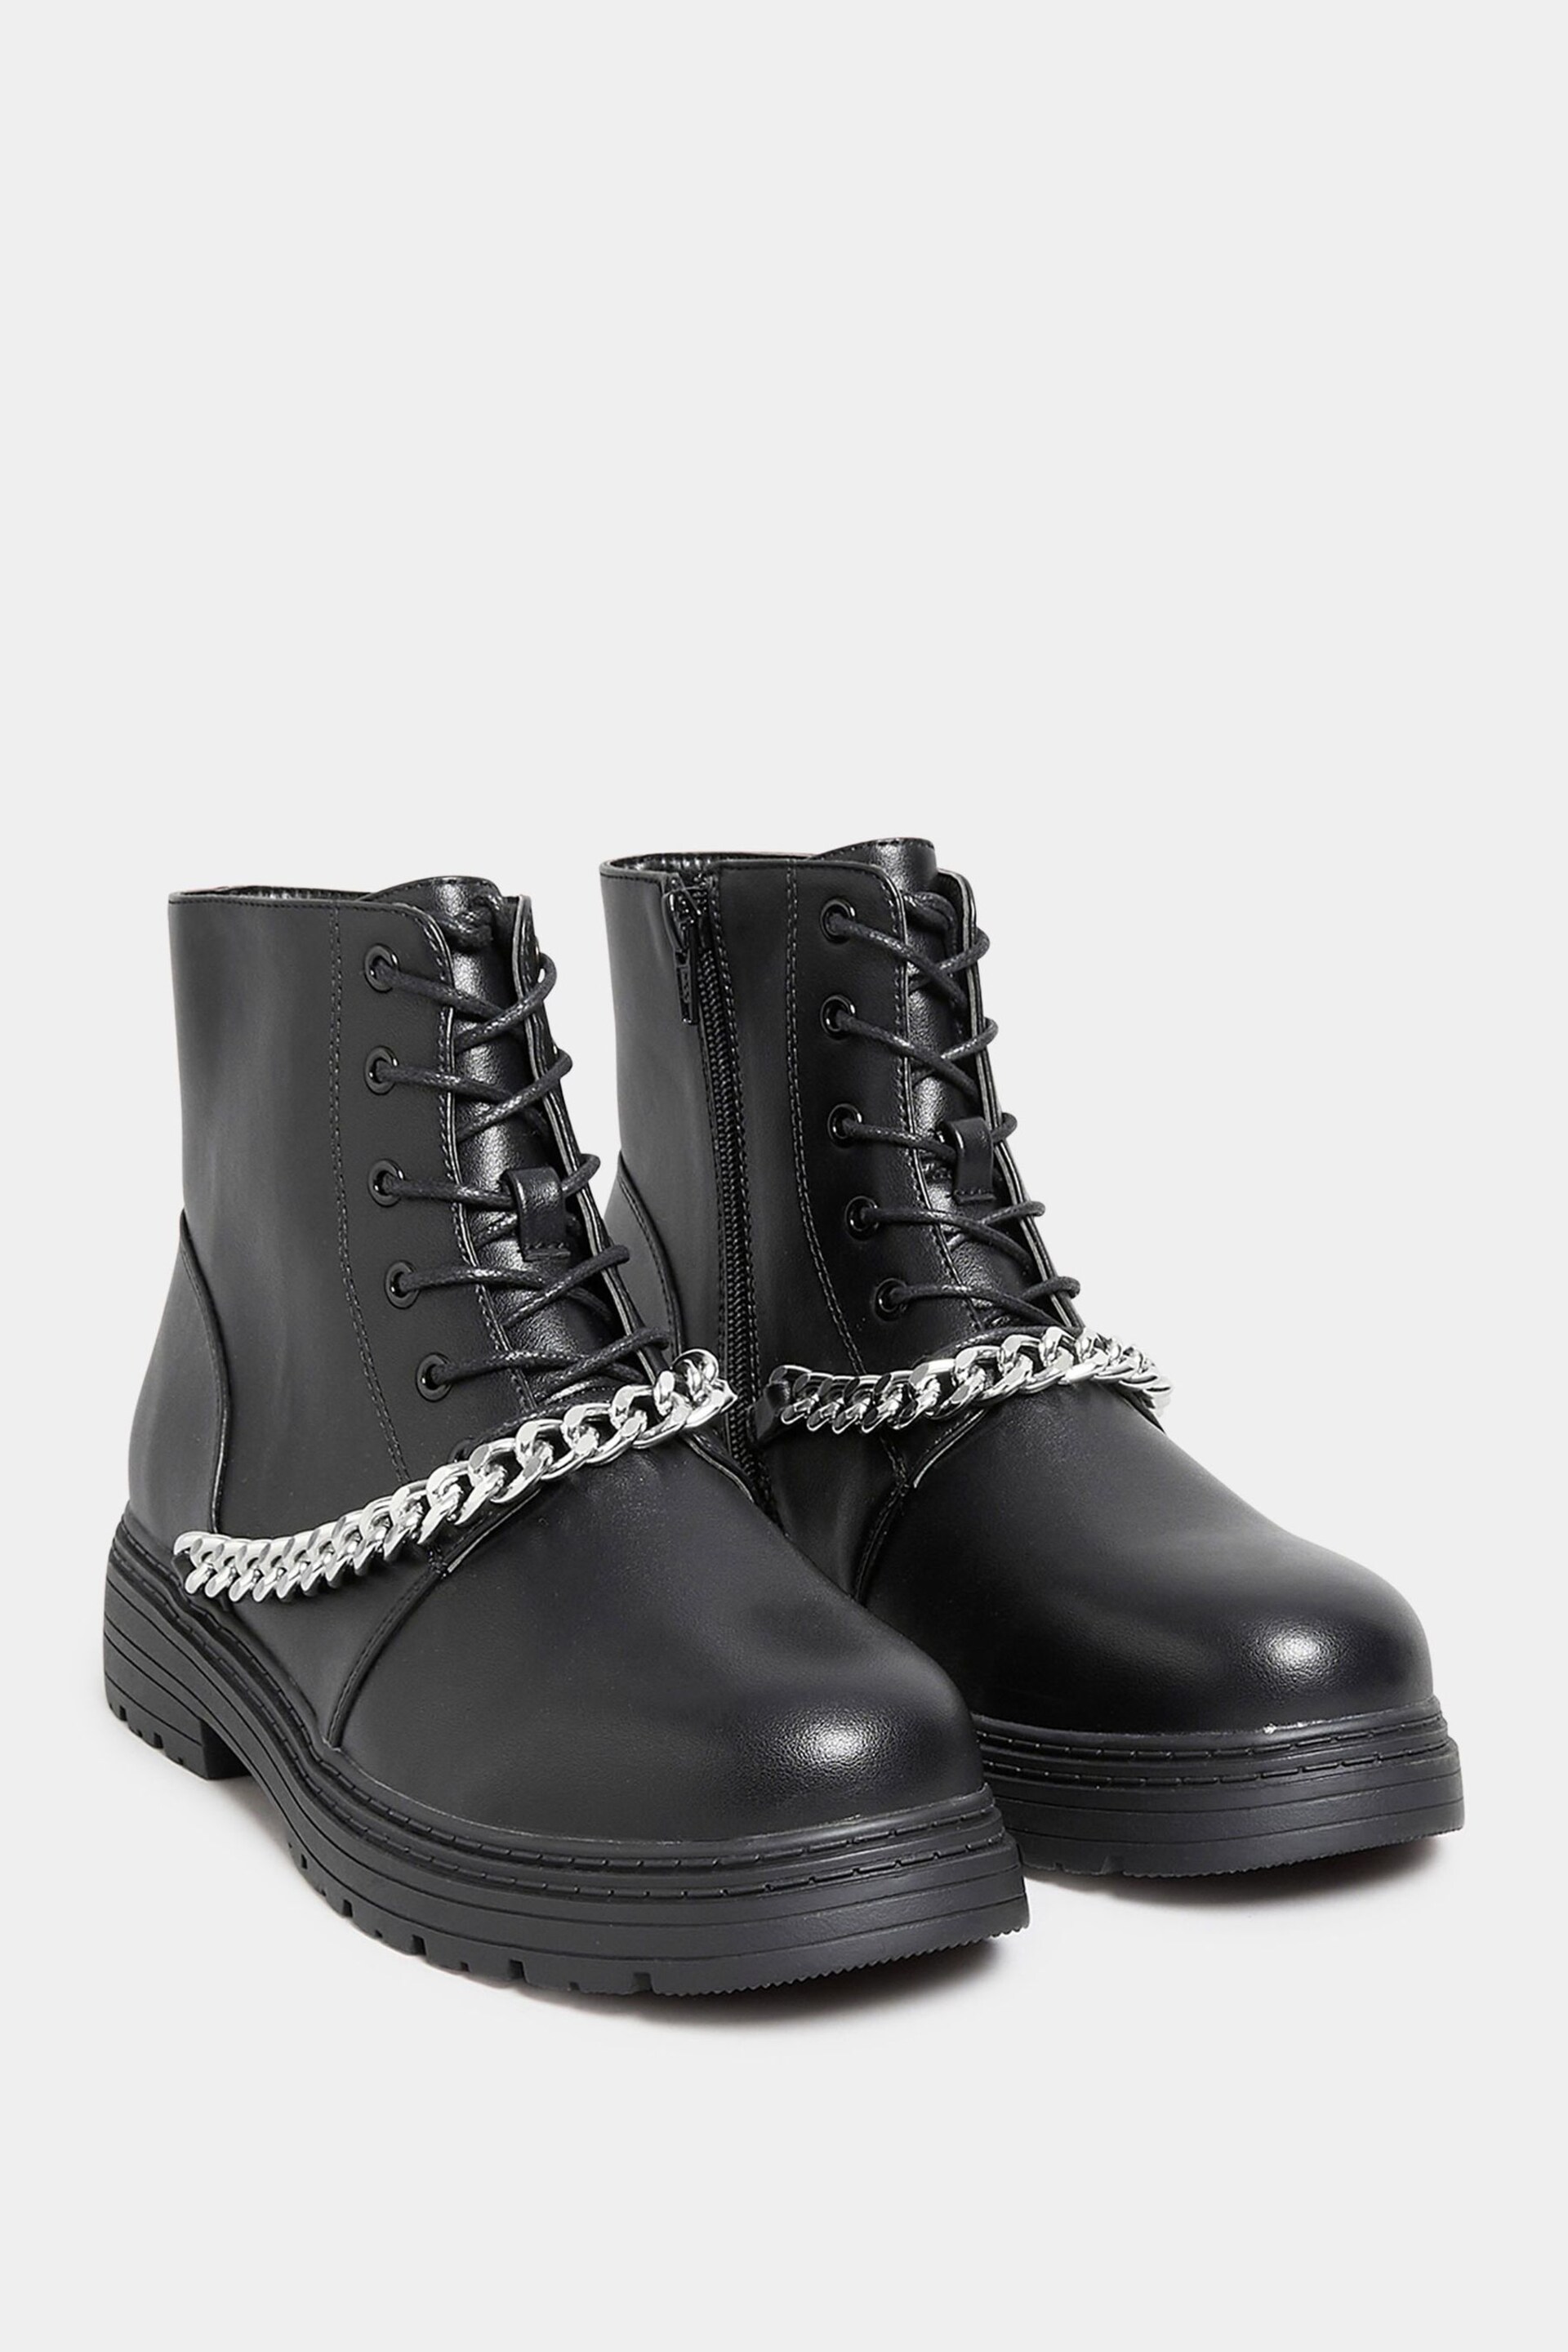 Yours Curve Black Extra-Wide Fit Chunky Chain Lace-Up Boots - Image 3 of 4